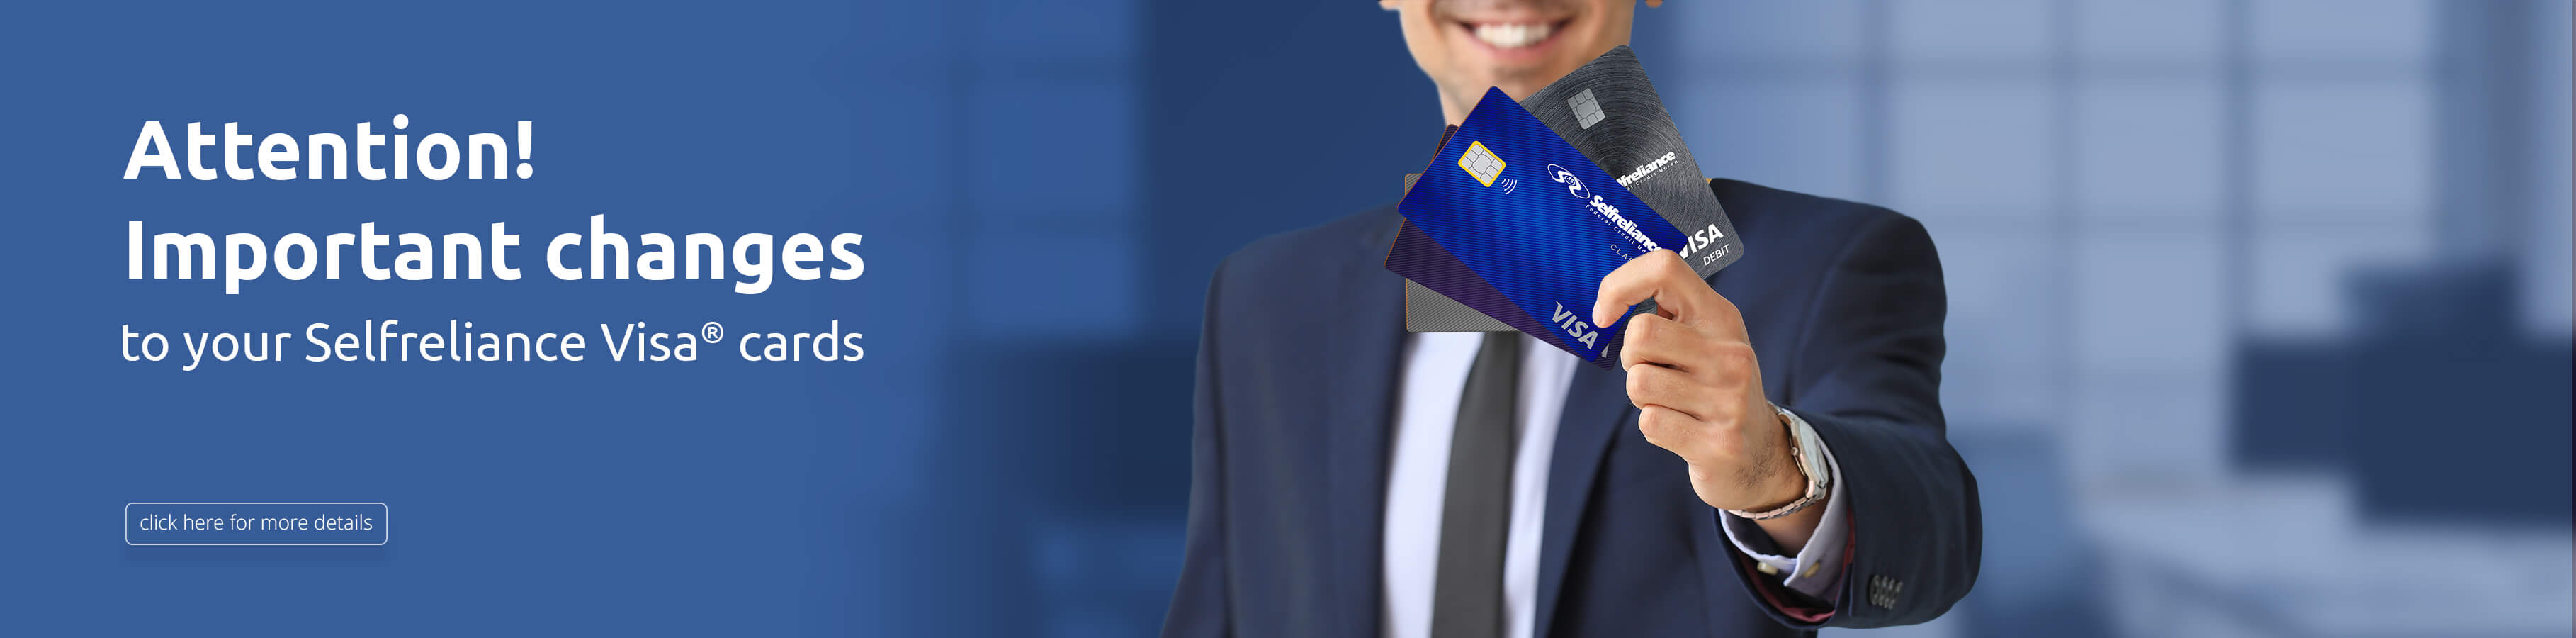 Attention! Important changes to your Selfreliance VisaÂ® cards